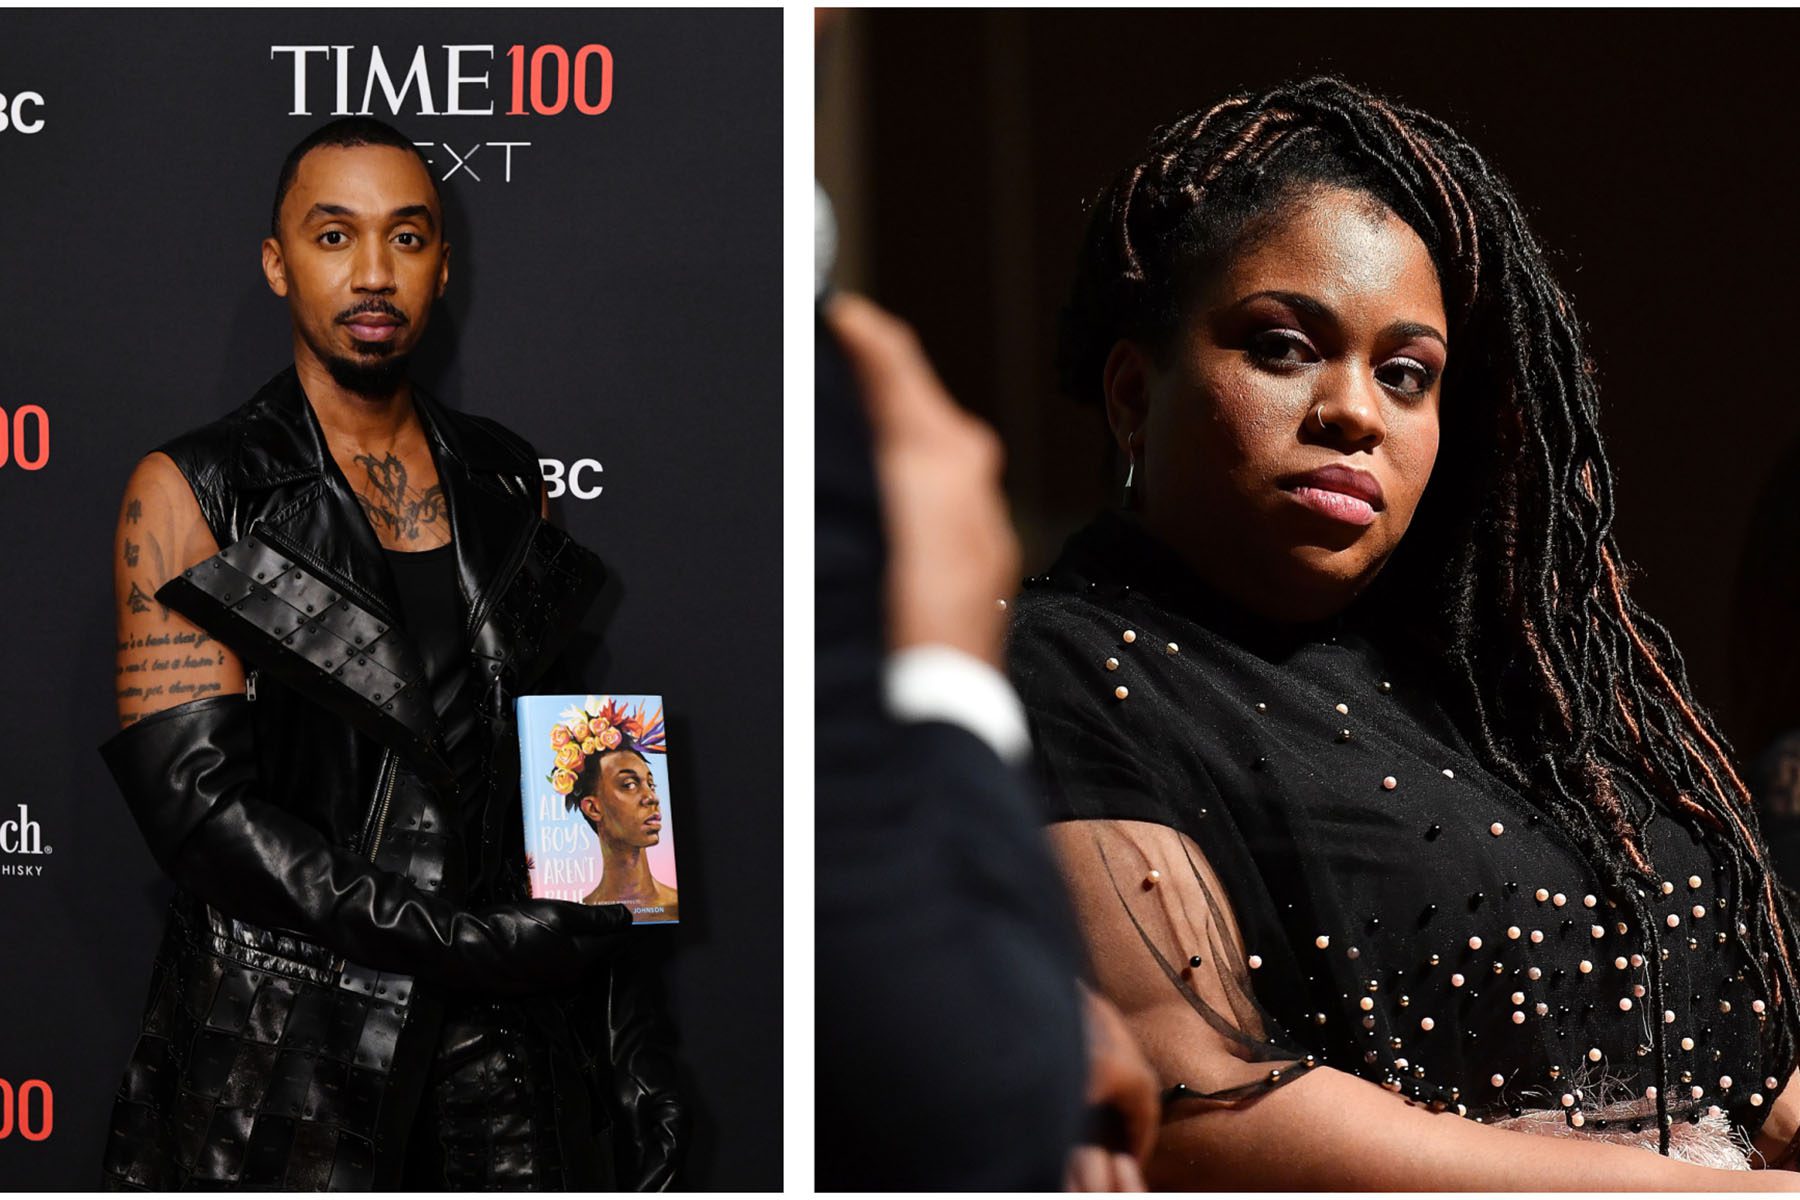 Left: George M. Johnson attends TIME100 Next Gala in New York City in October 22. Right: Angie Thomas is seen onstage during the Morehouse College Crown Forum in October 2018 in Atlanta.